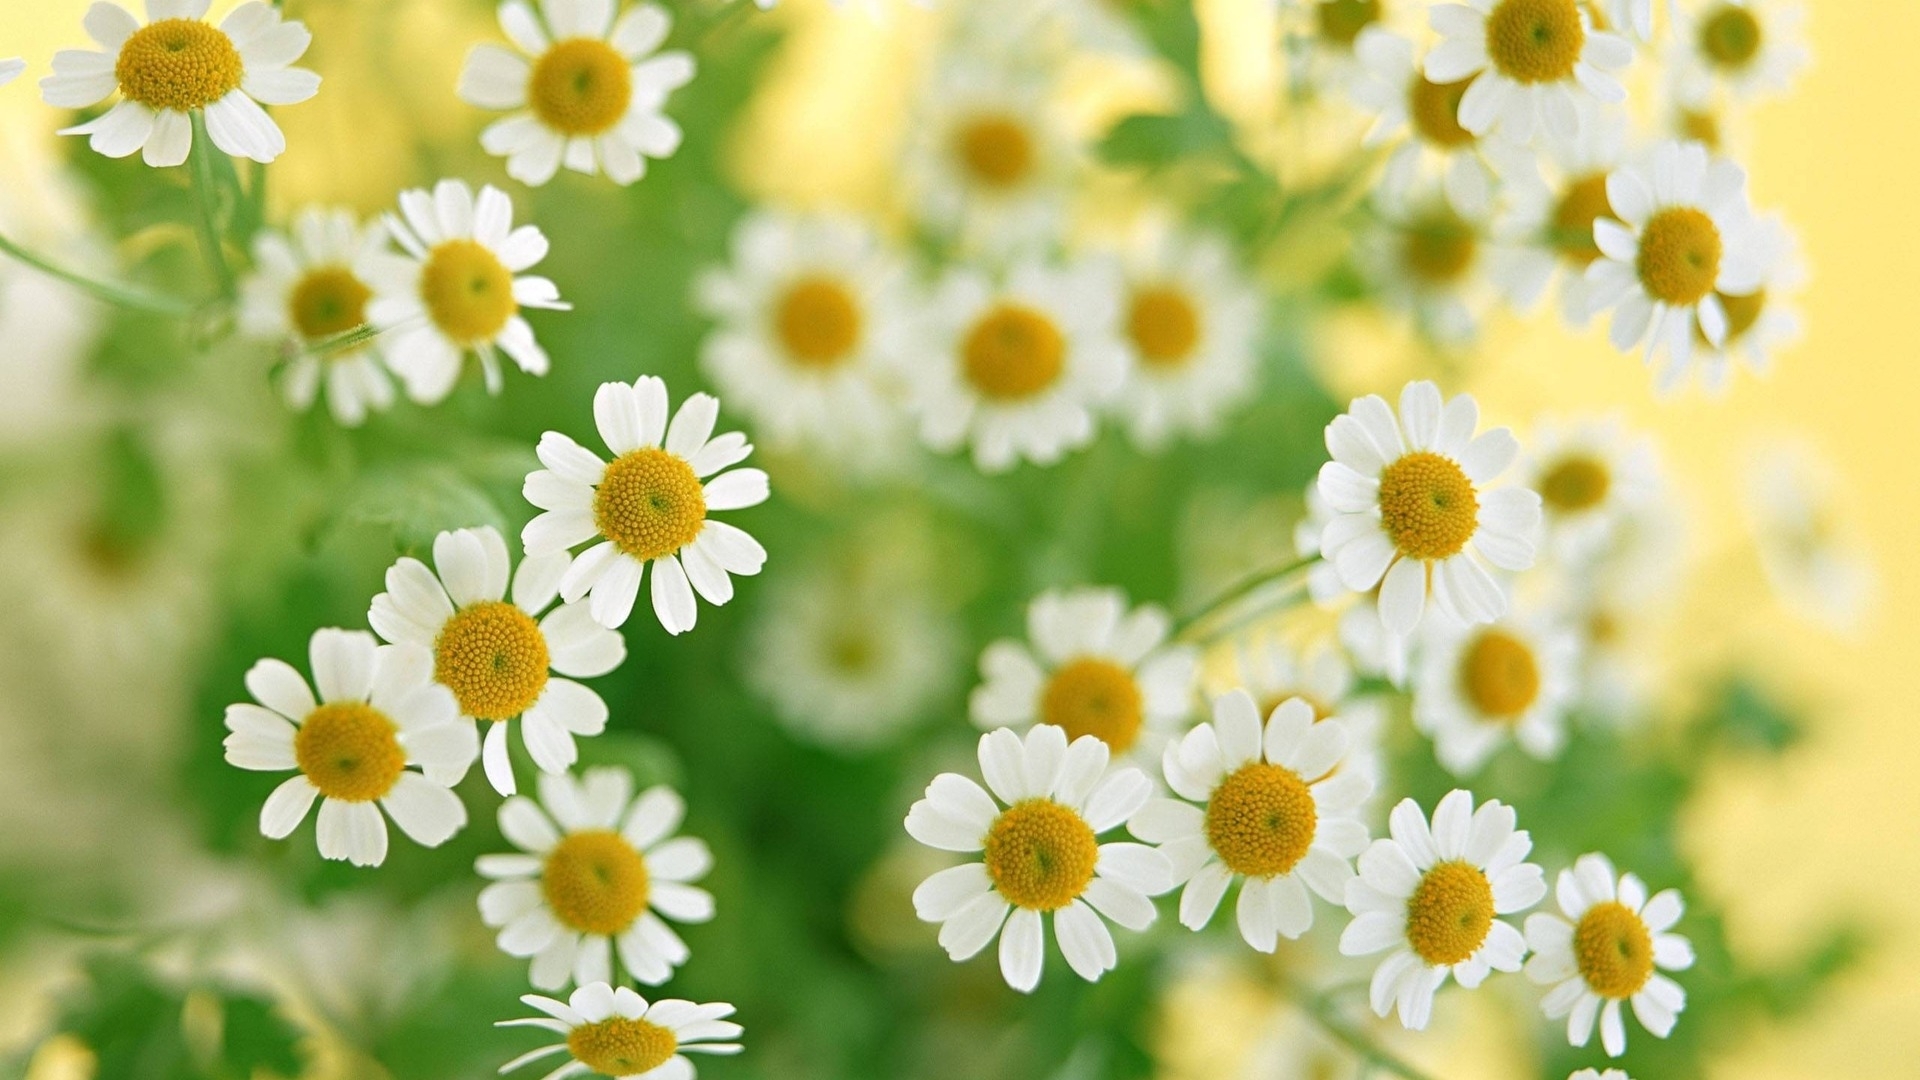 plants, flowers, camomile, green